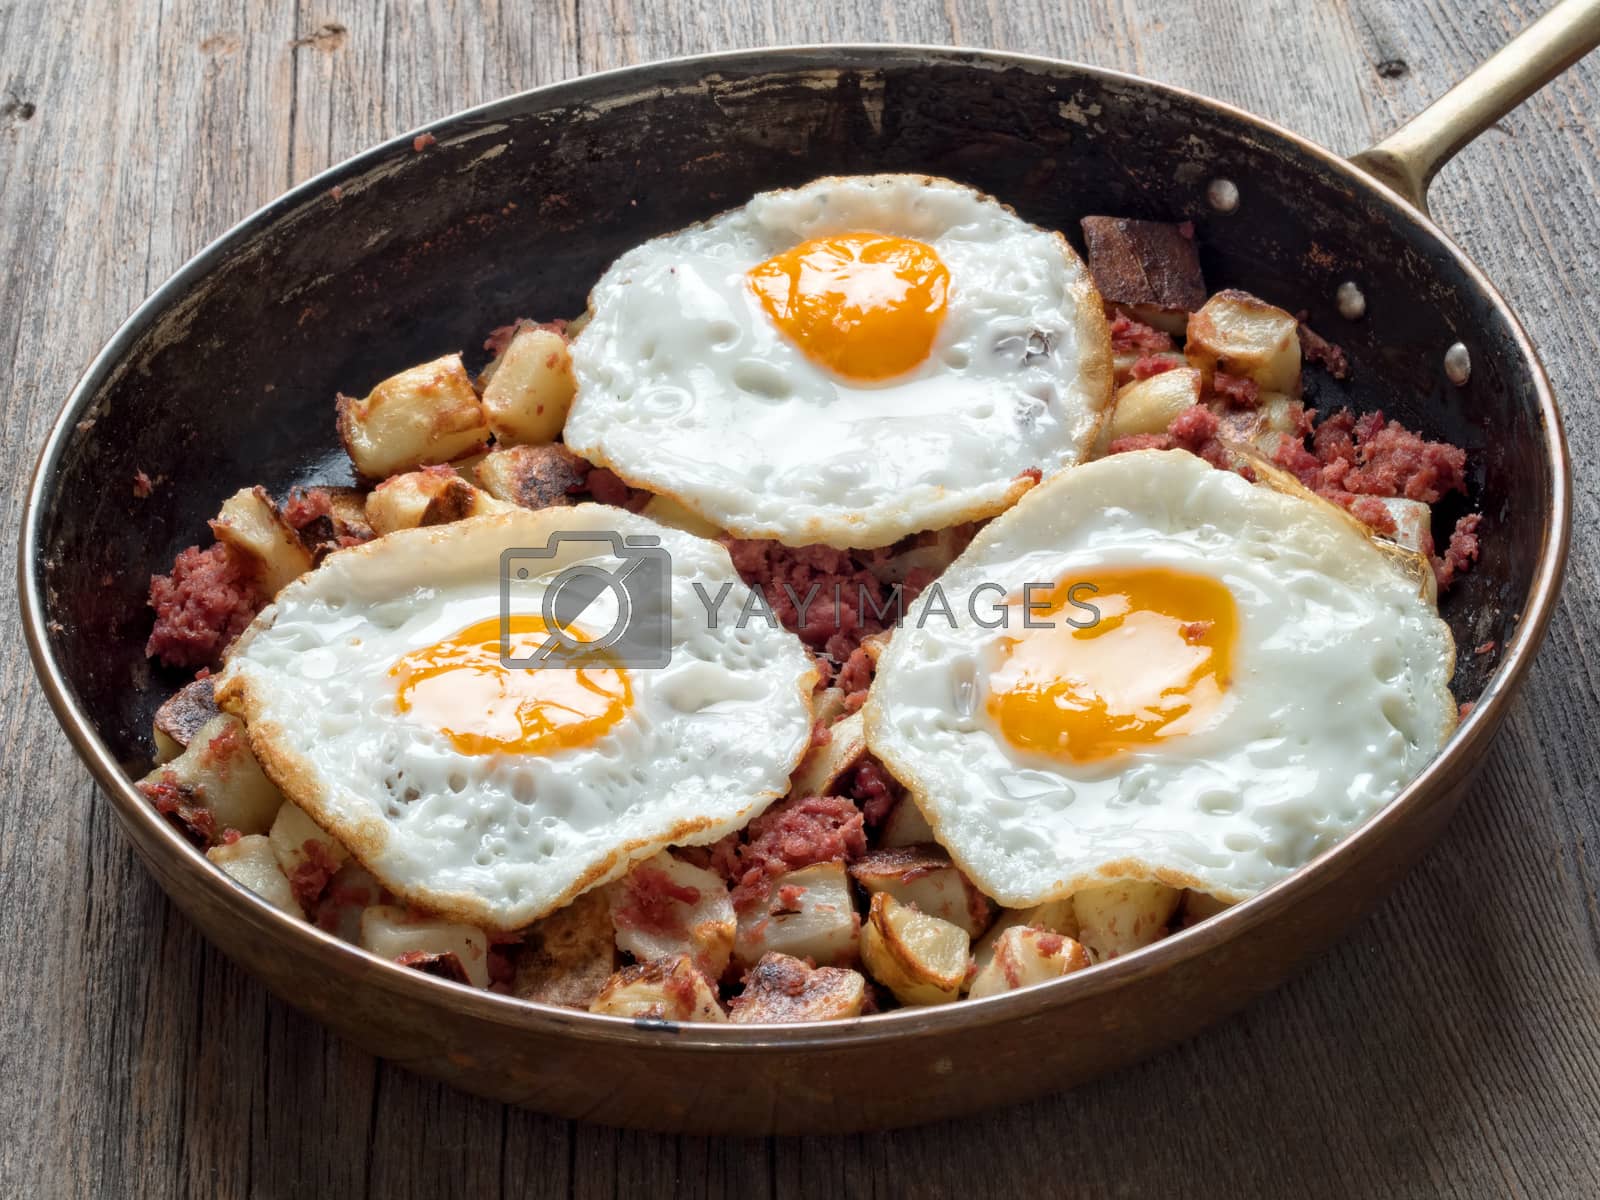 Royalty free image of rustic corned beef hash by zkruger